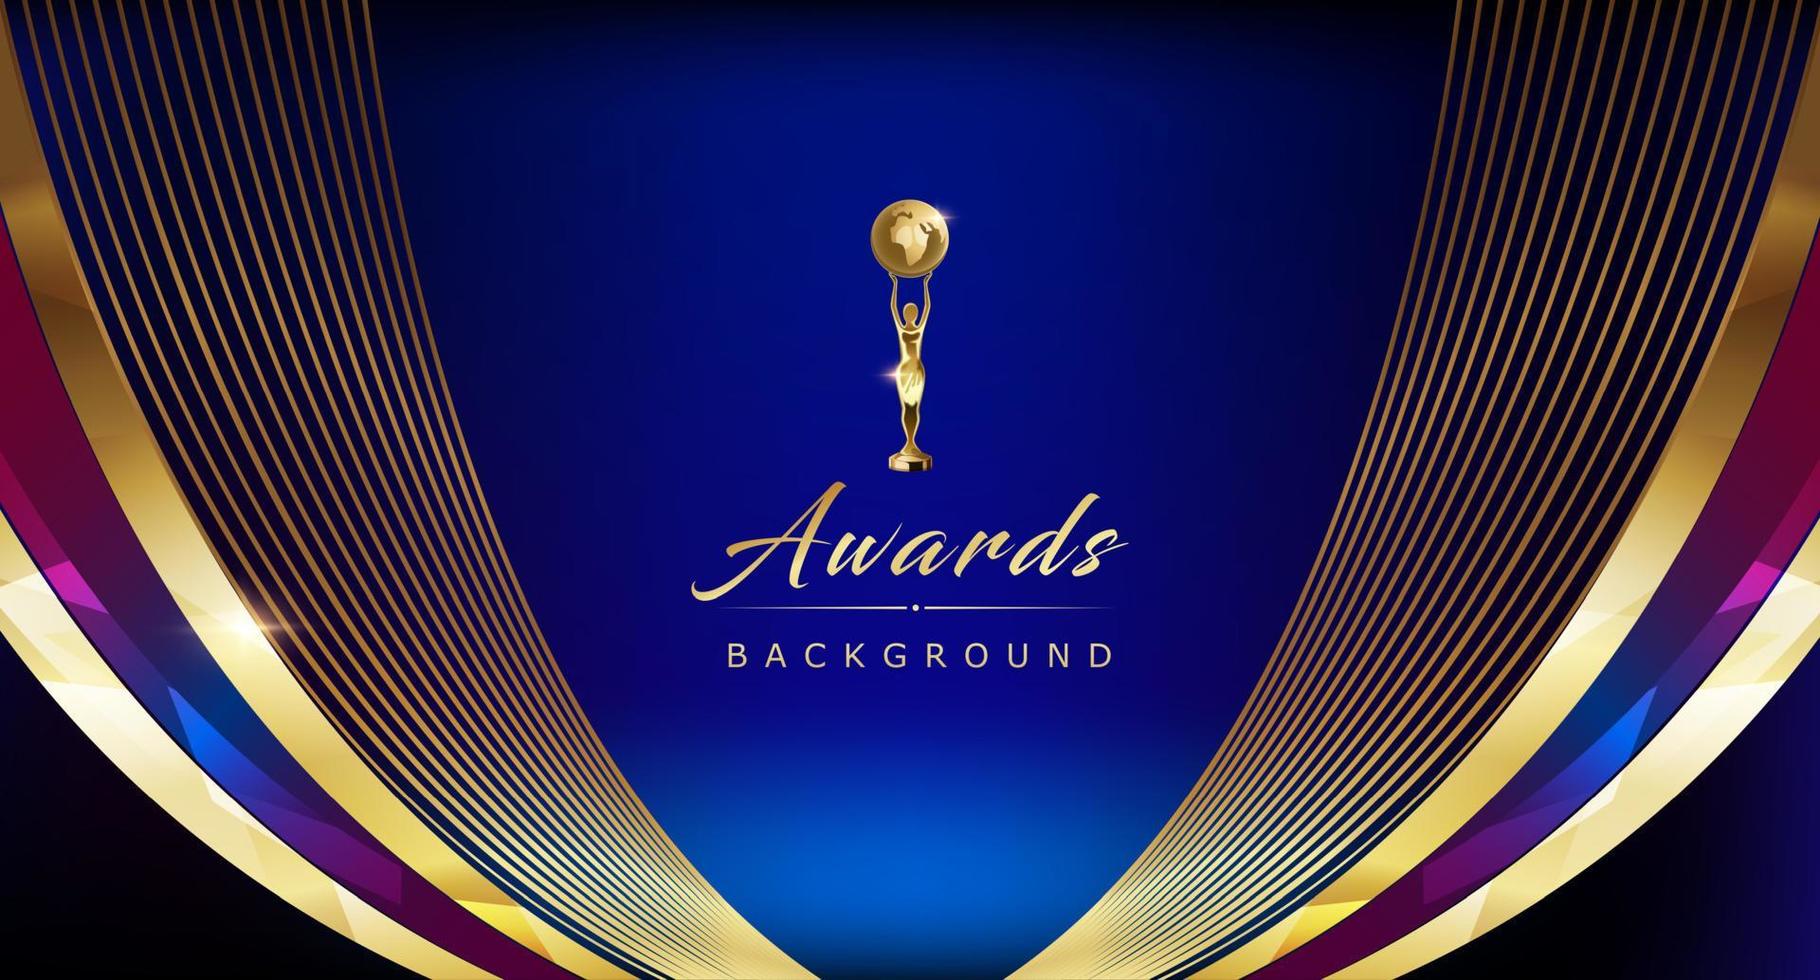 Blue Pink Golden Curve Corner Royal Awards Graphics Background Lines Moving Crystal Elegant Shine Modern Template Luxury Premium Corporate Abstract Design Template Banner Certificate Dynamic Shape vector